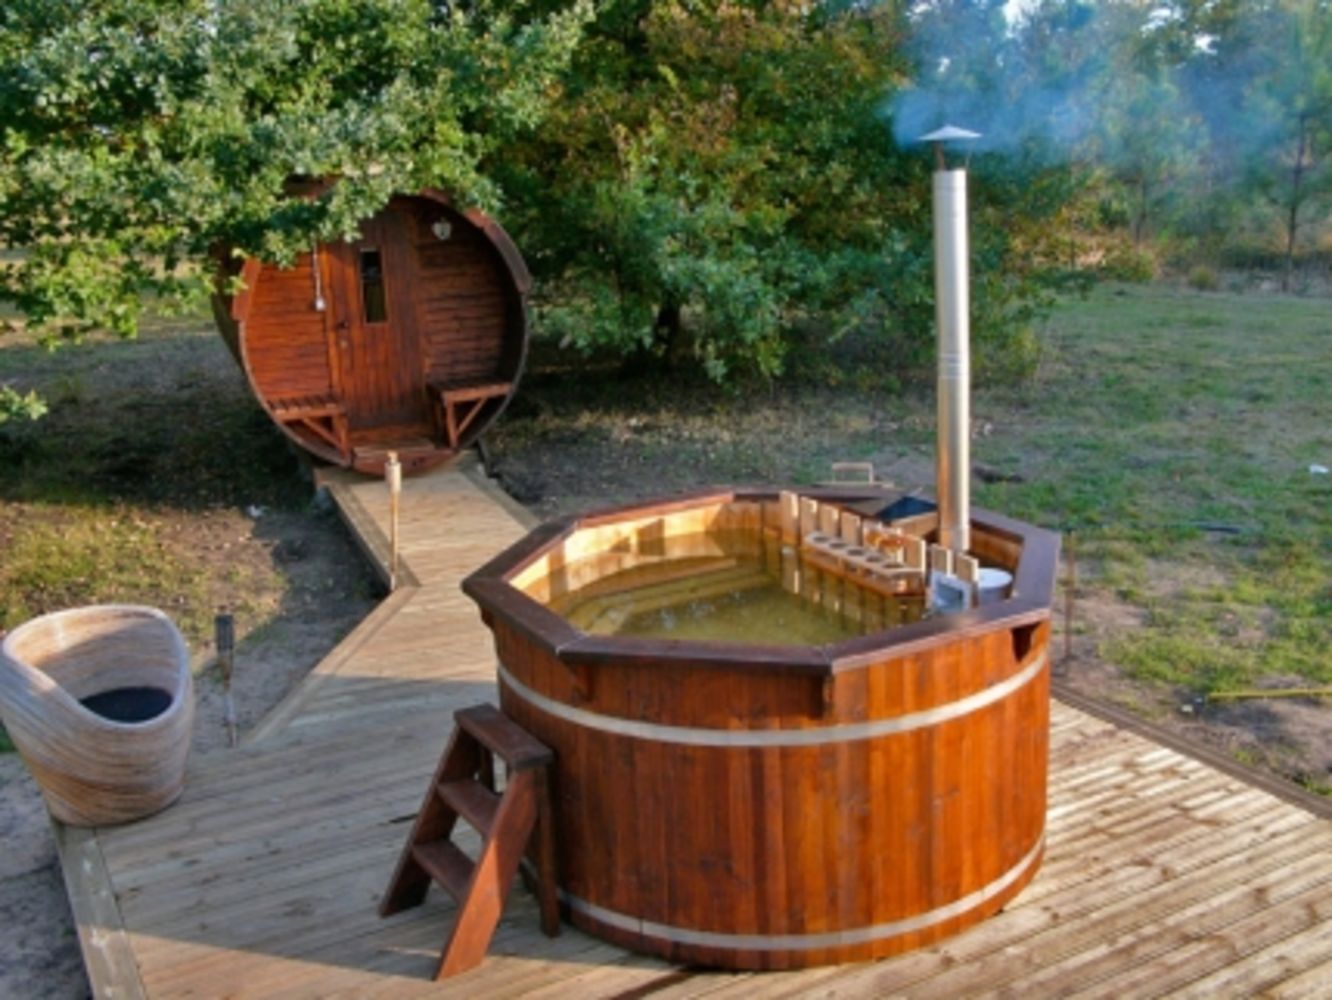 BRAND NEW Luxury Spruce Hot Tubs - Range Of Sizes & Specs + Modern Designer Patio Heaters From High End Gardening Company